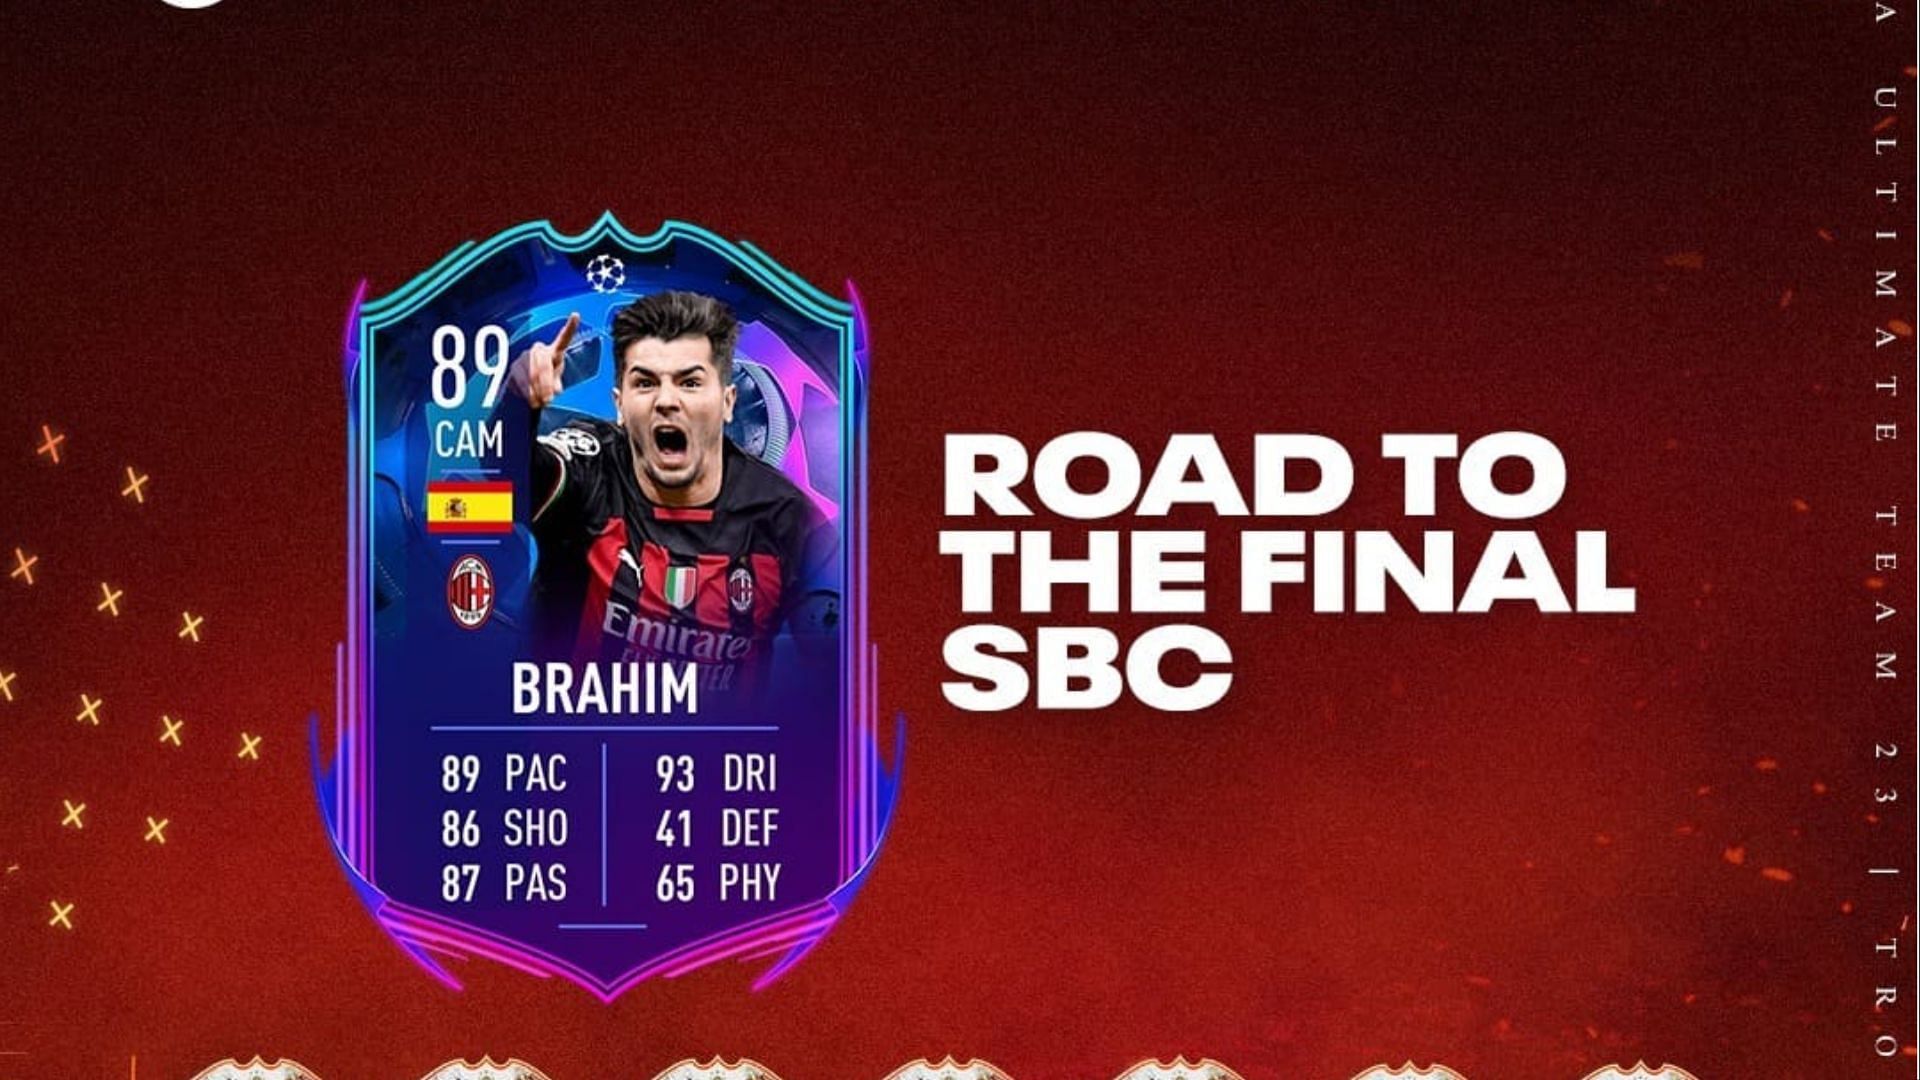 The Brahim Diaz RTTF SBC could be highly useful for FIFA 23 players (Image via EA Sports)